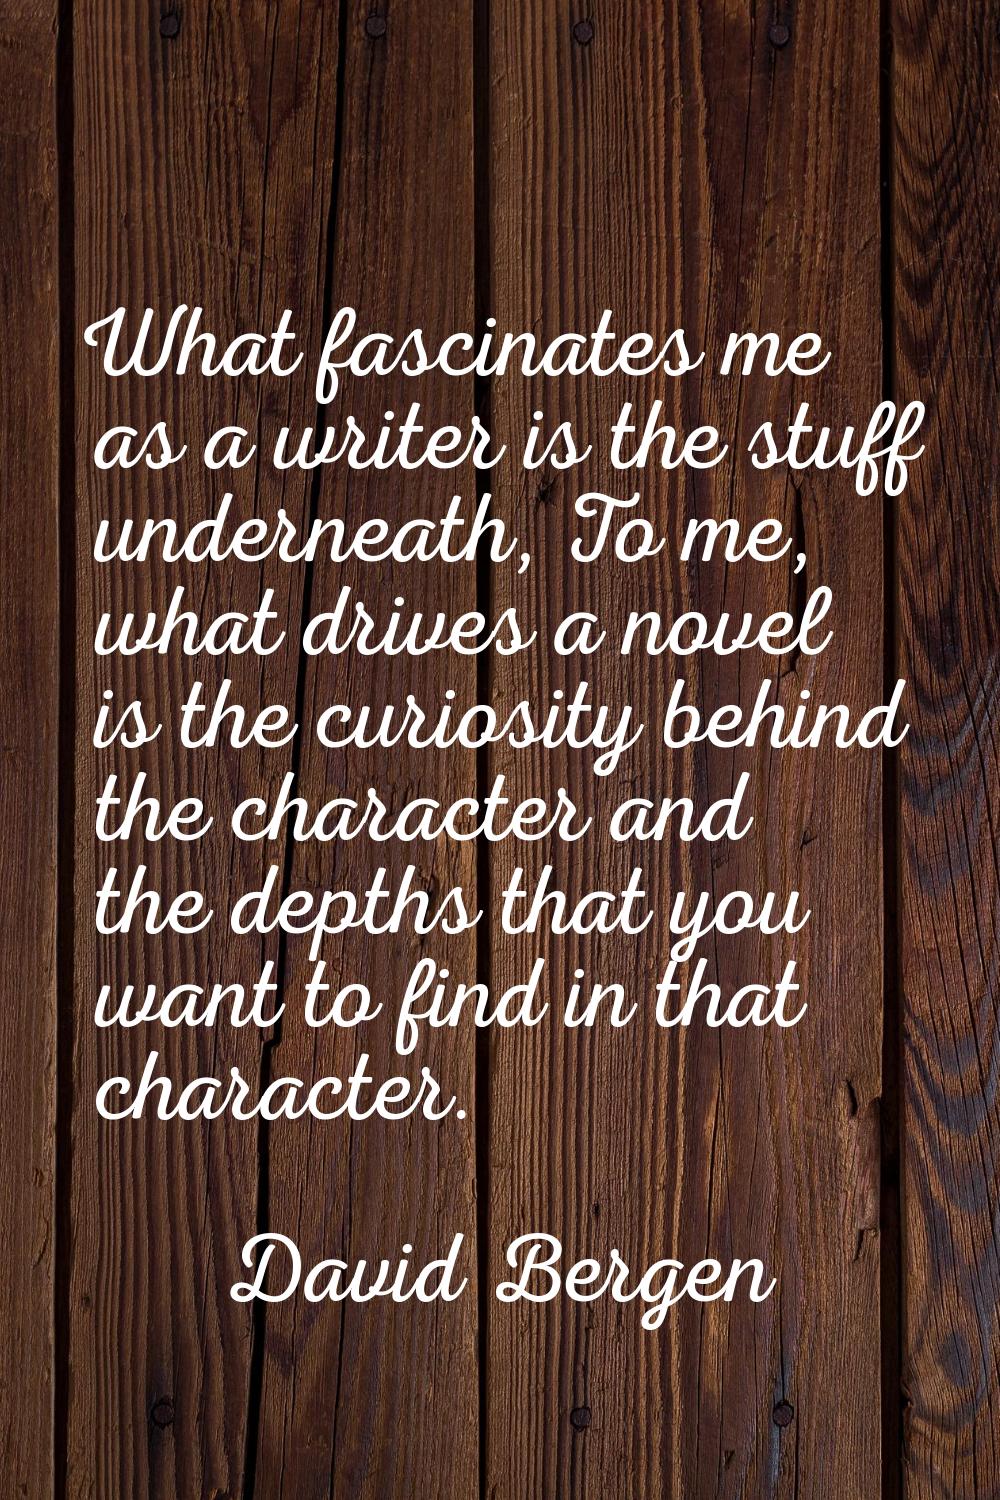 What fascinates me as a writer is the stuff underneath, To me, what drives a novel is the curiosity